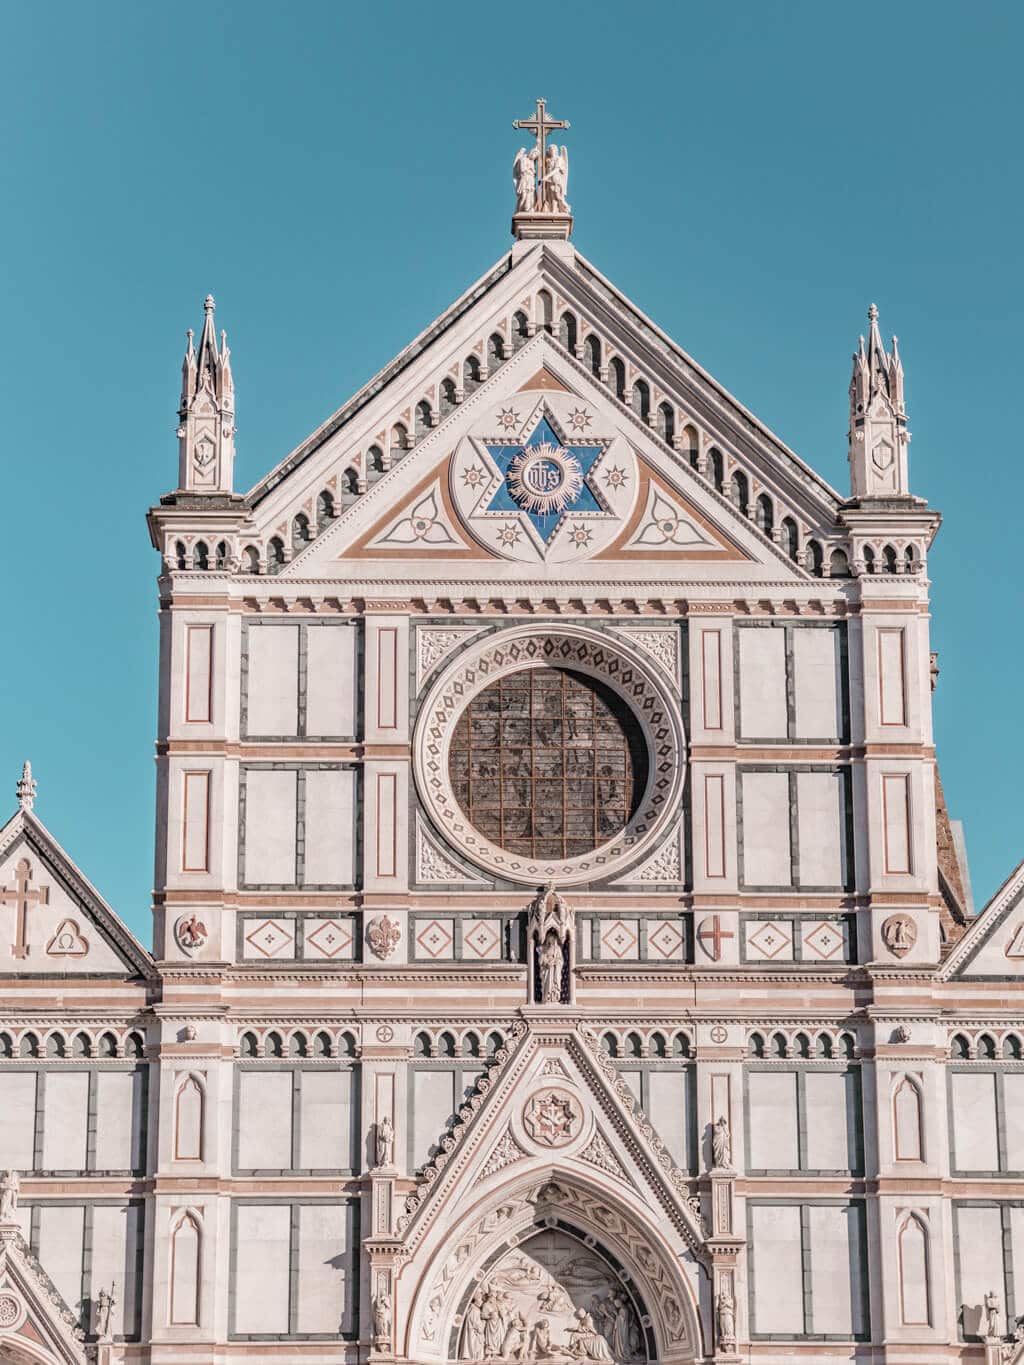 A Guide For Planning A Trip To Florence - Things to do in Tuscan's capital {2 day itinerary, including food & restaurants tips, pasta making and sightseeing}